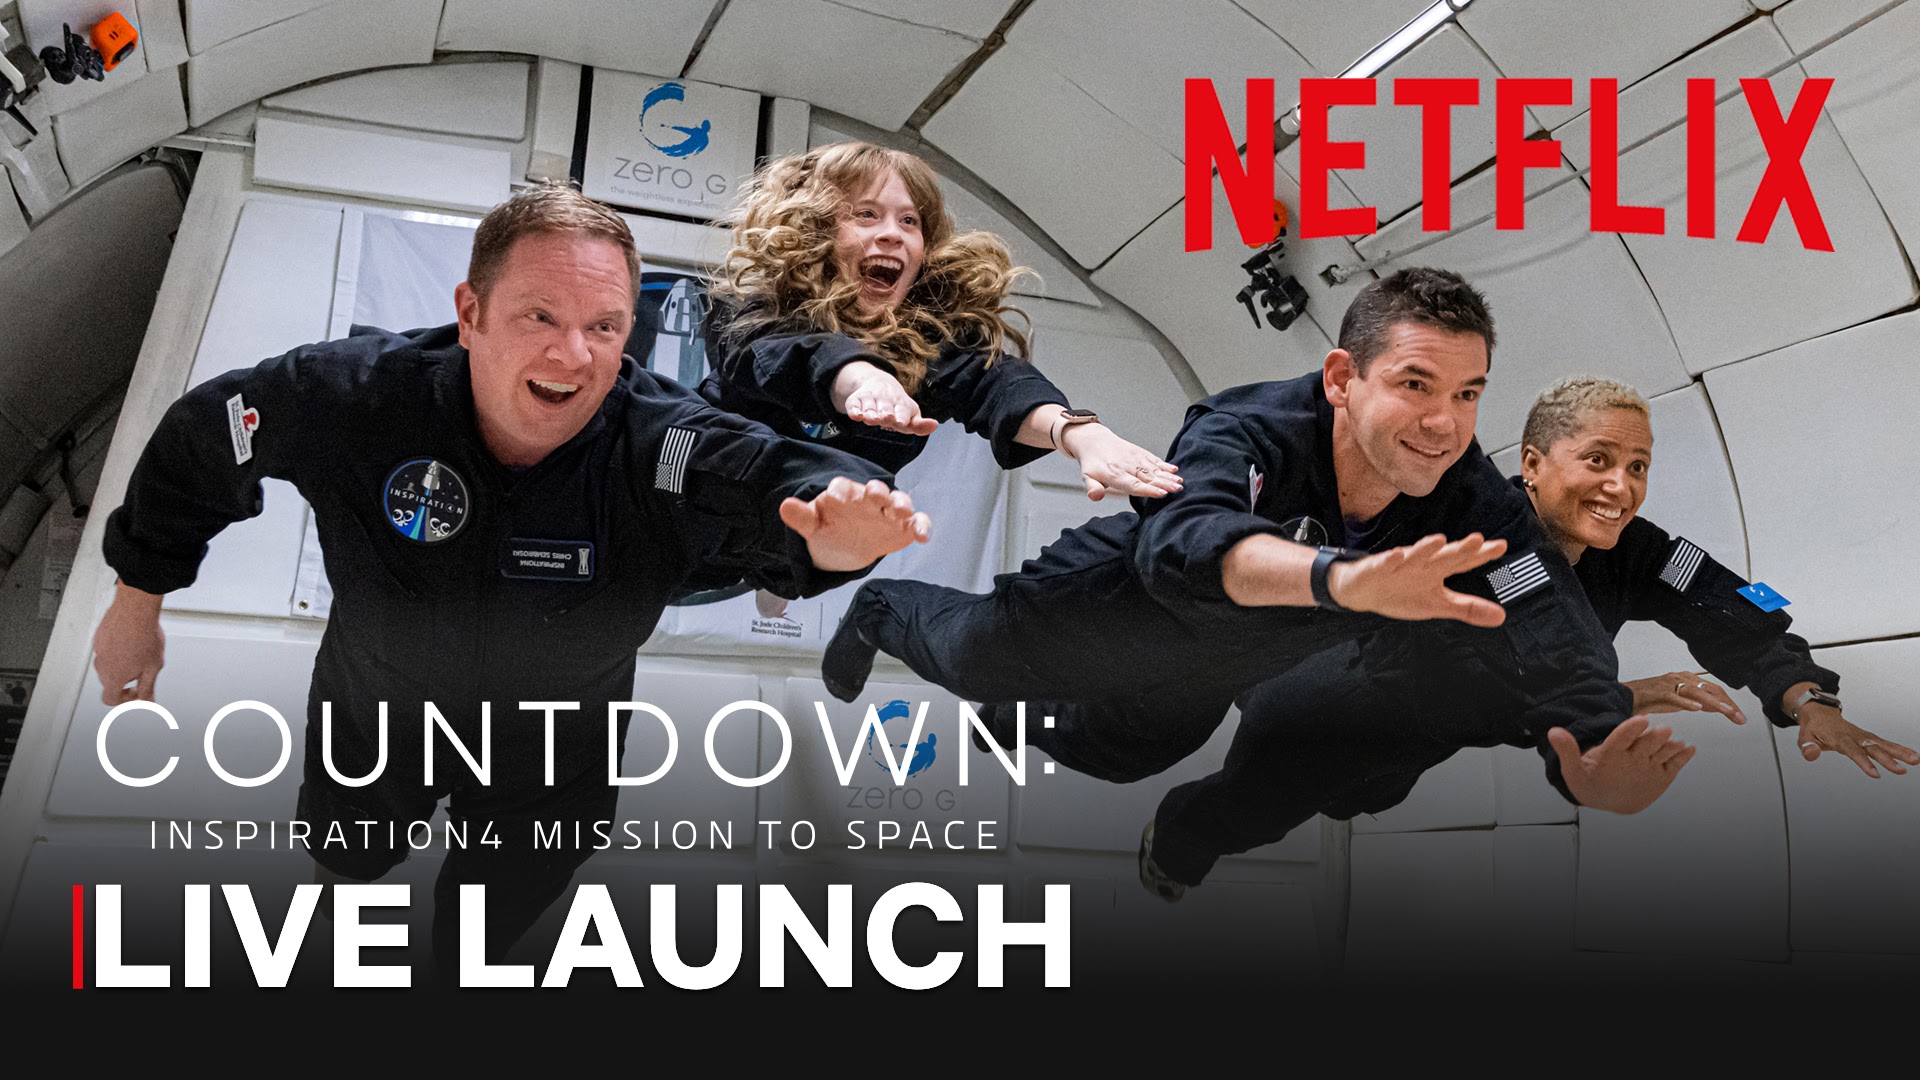 Netflix to livestream SpaceX’s Inspiration4 all-civilian originate with superstar-packed countdown event